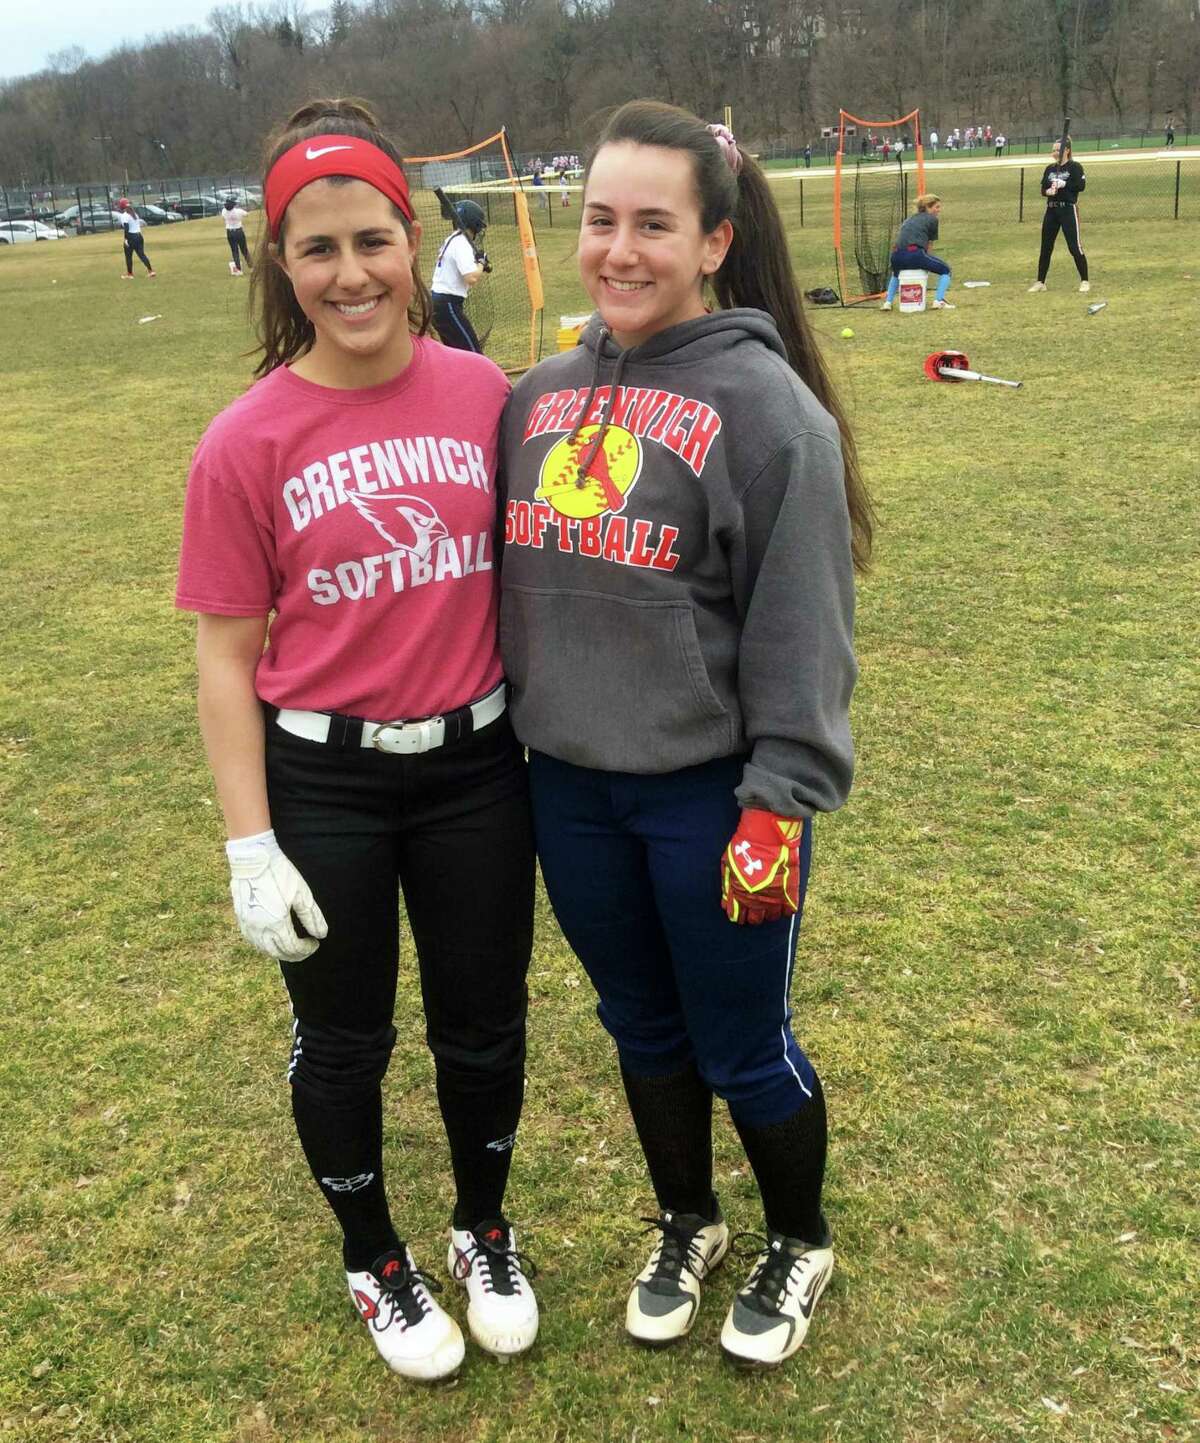 Sophia Prieto, left, and Julie Gambino are senior captains of the Greenwich High School softball team. March 26, 2019